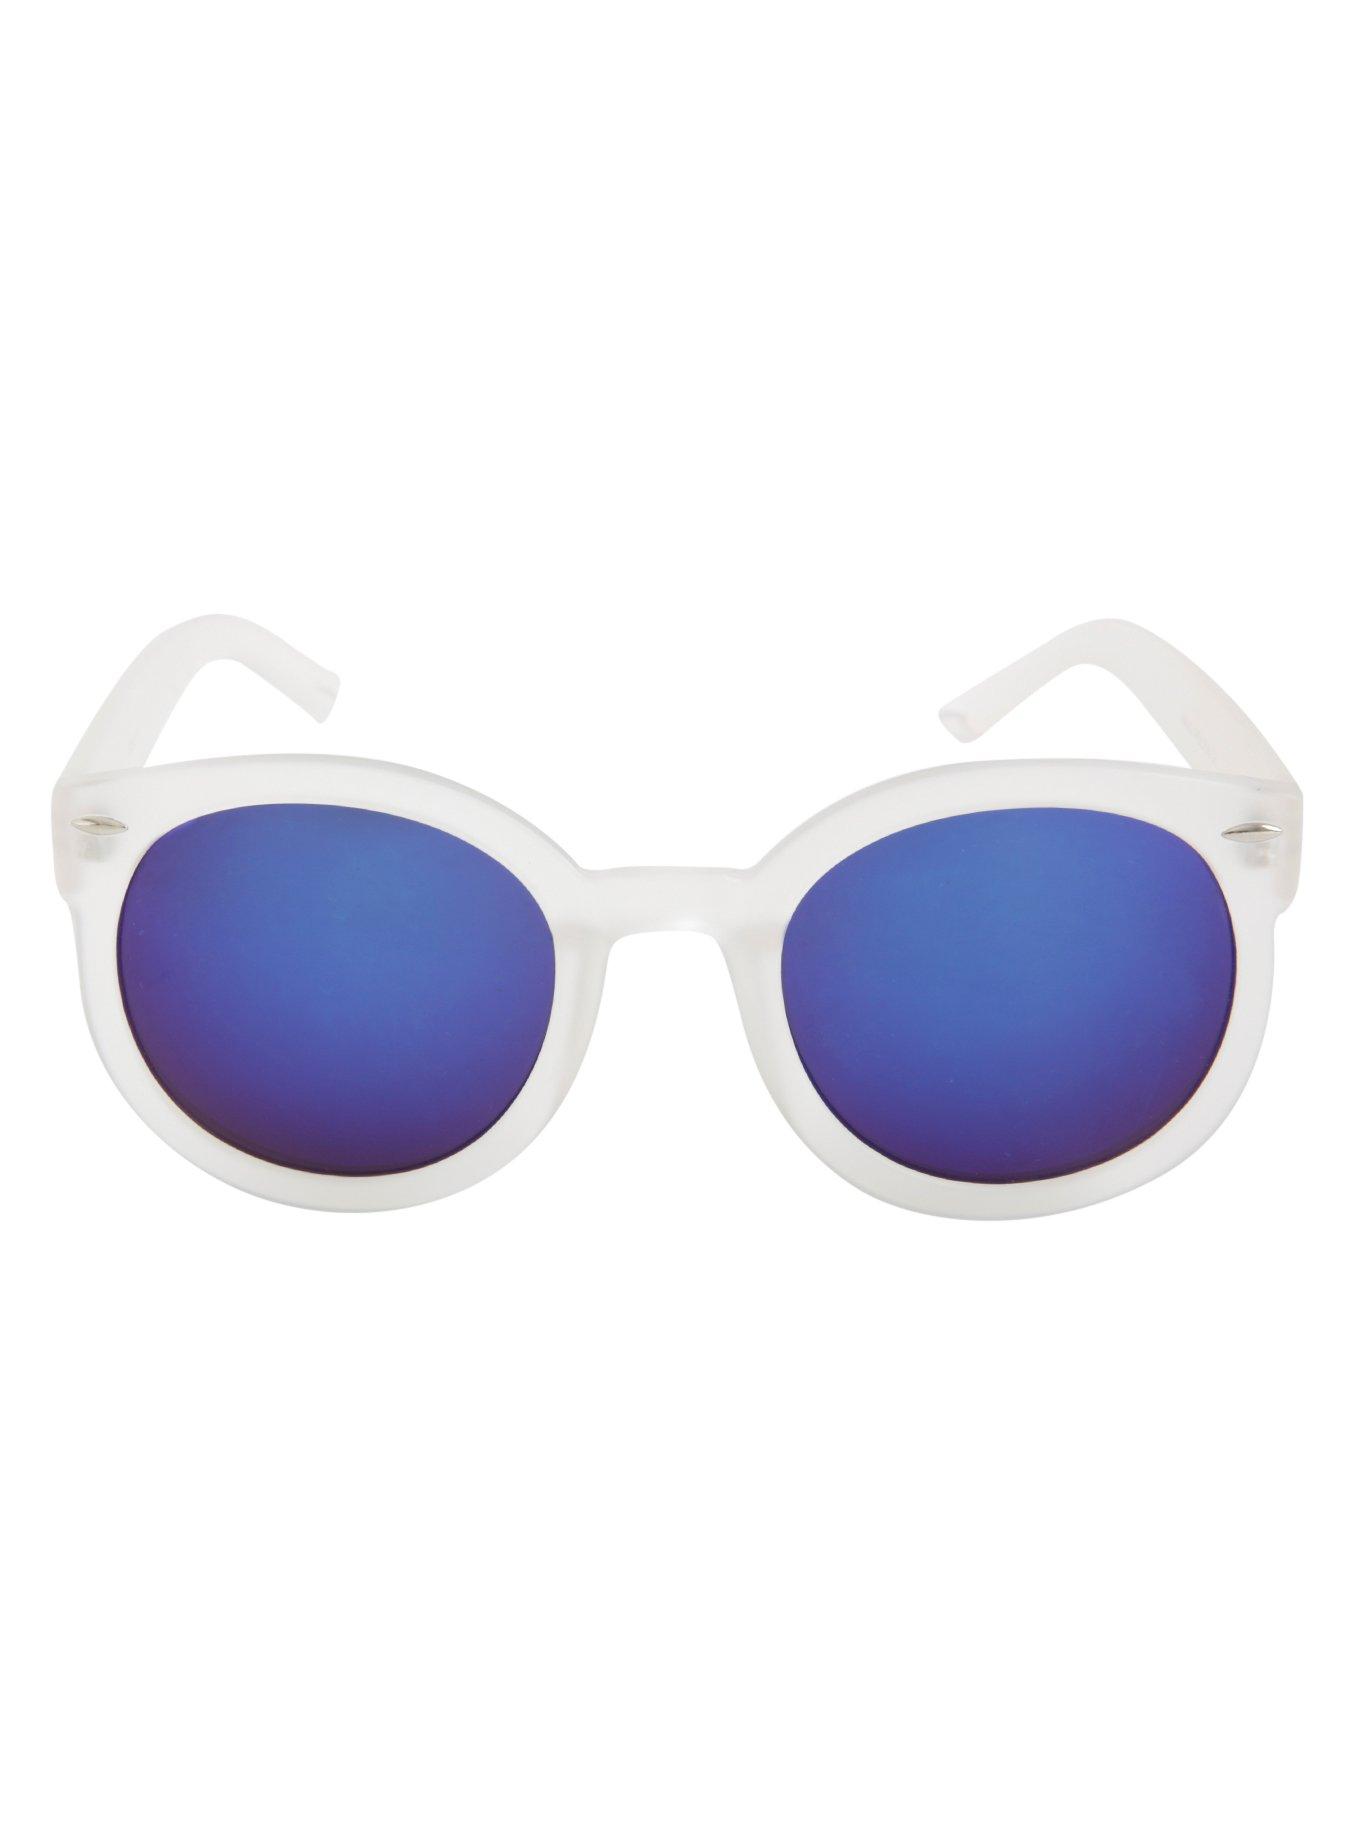 Clear Frosted Blue Lens Round Sunglasses, , alternate